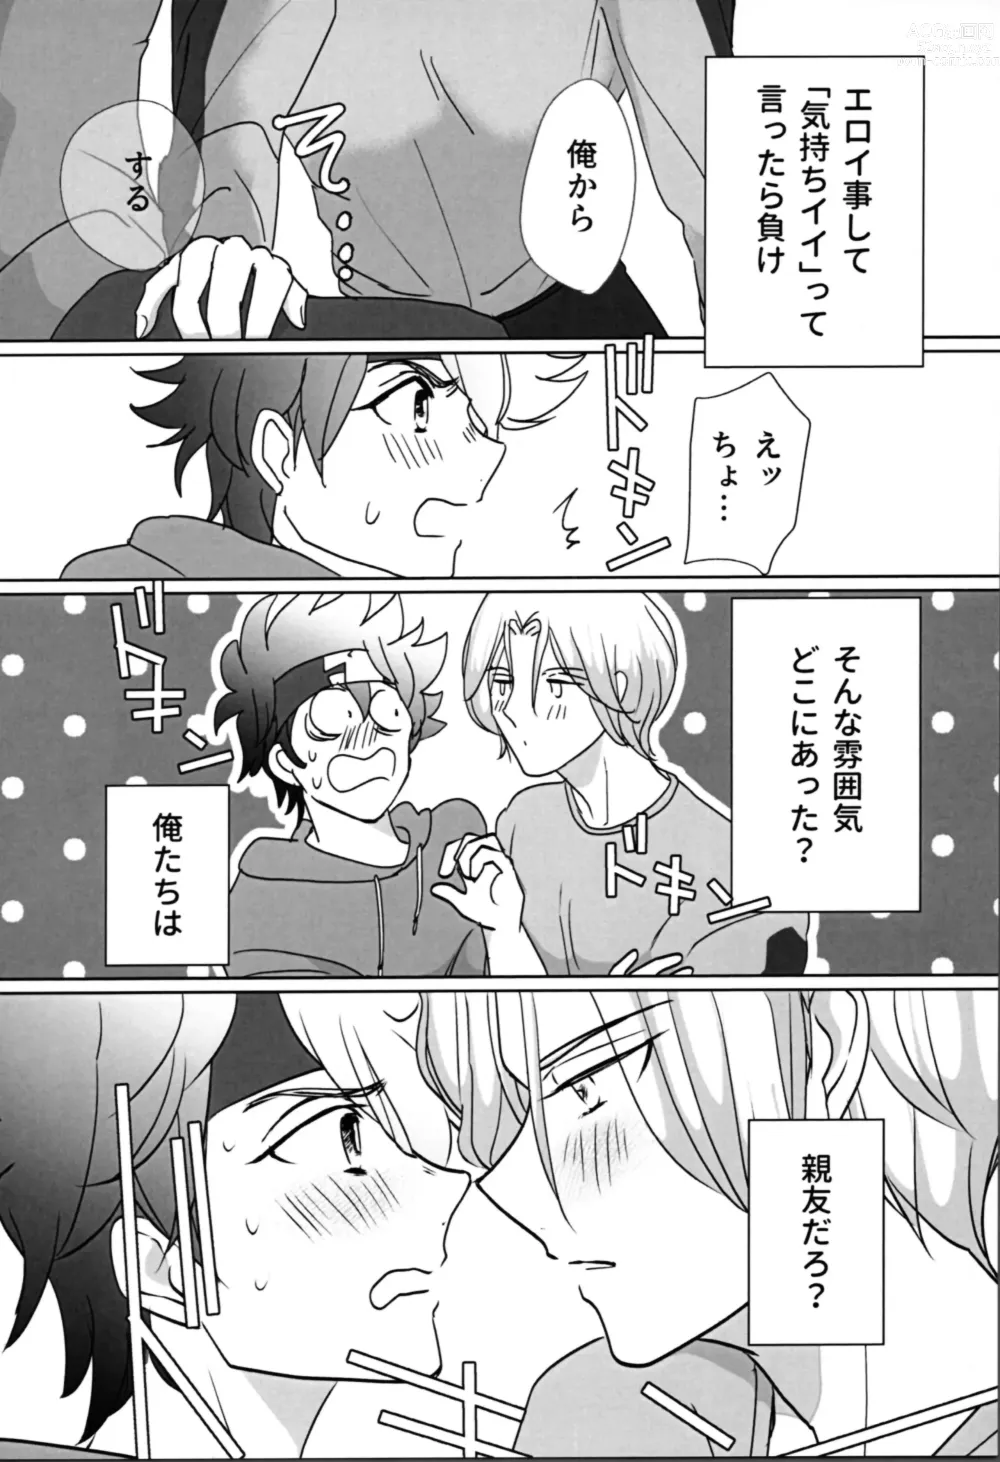 Page 9 of doujinshi What you like about me.